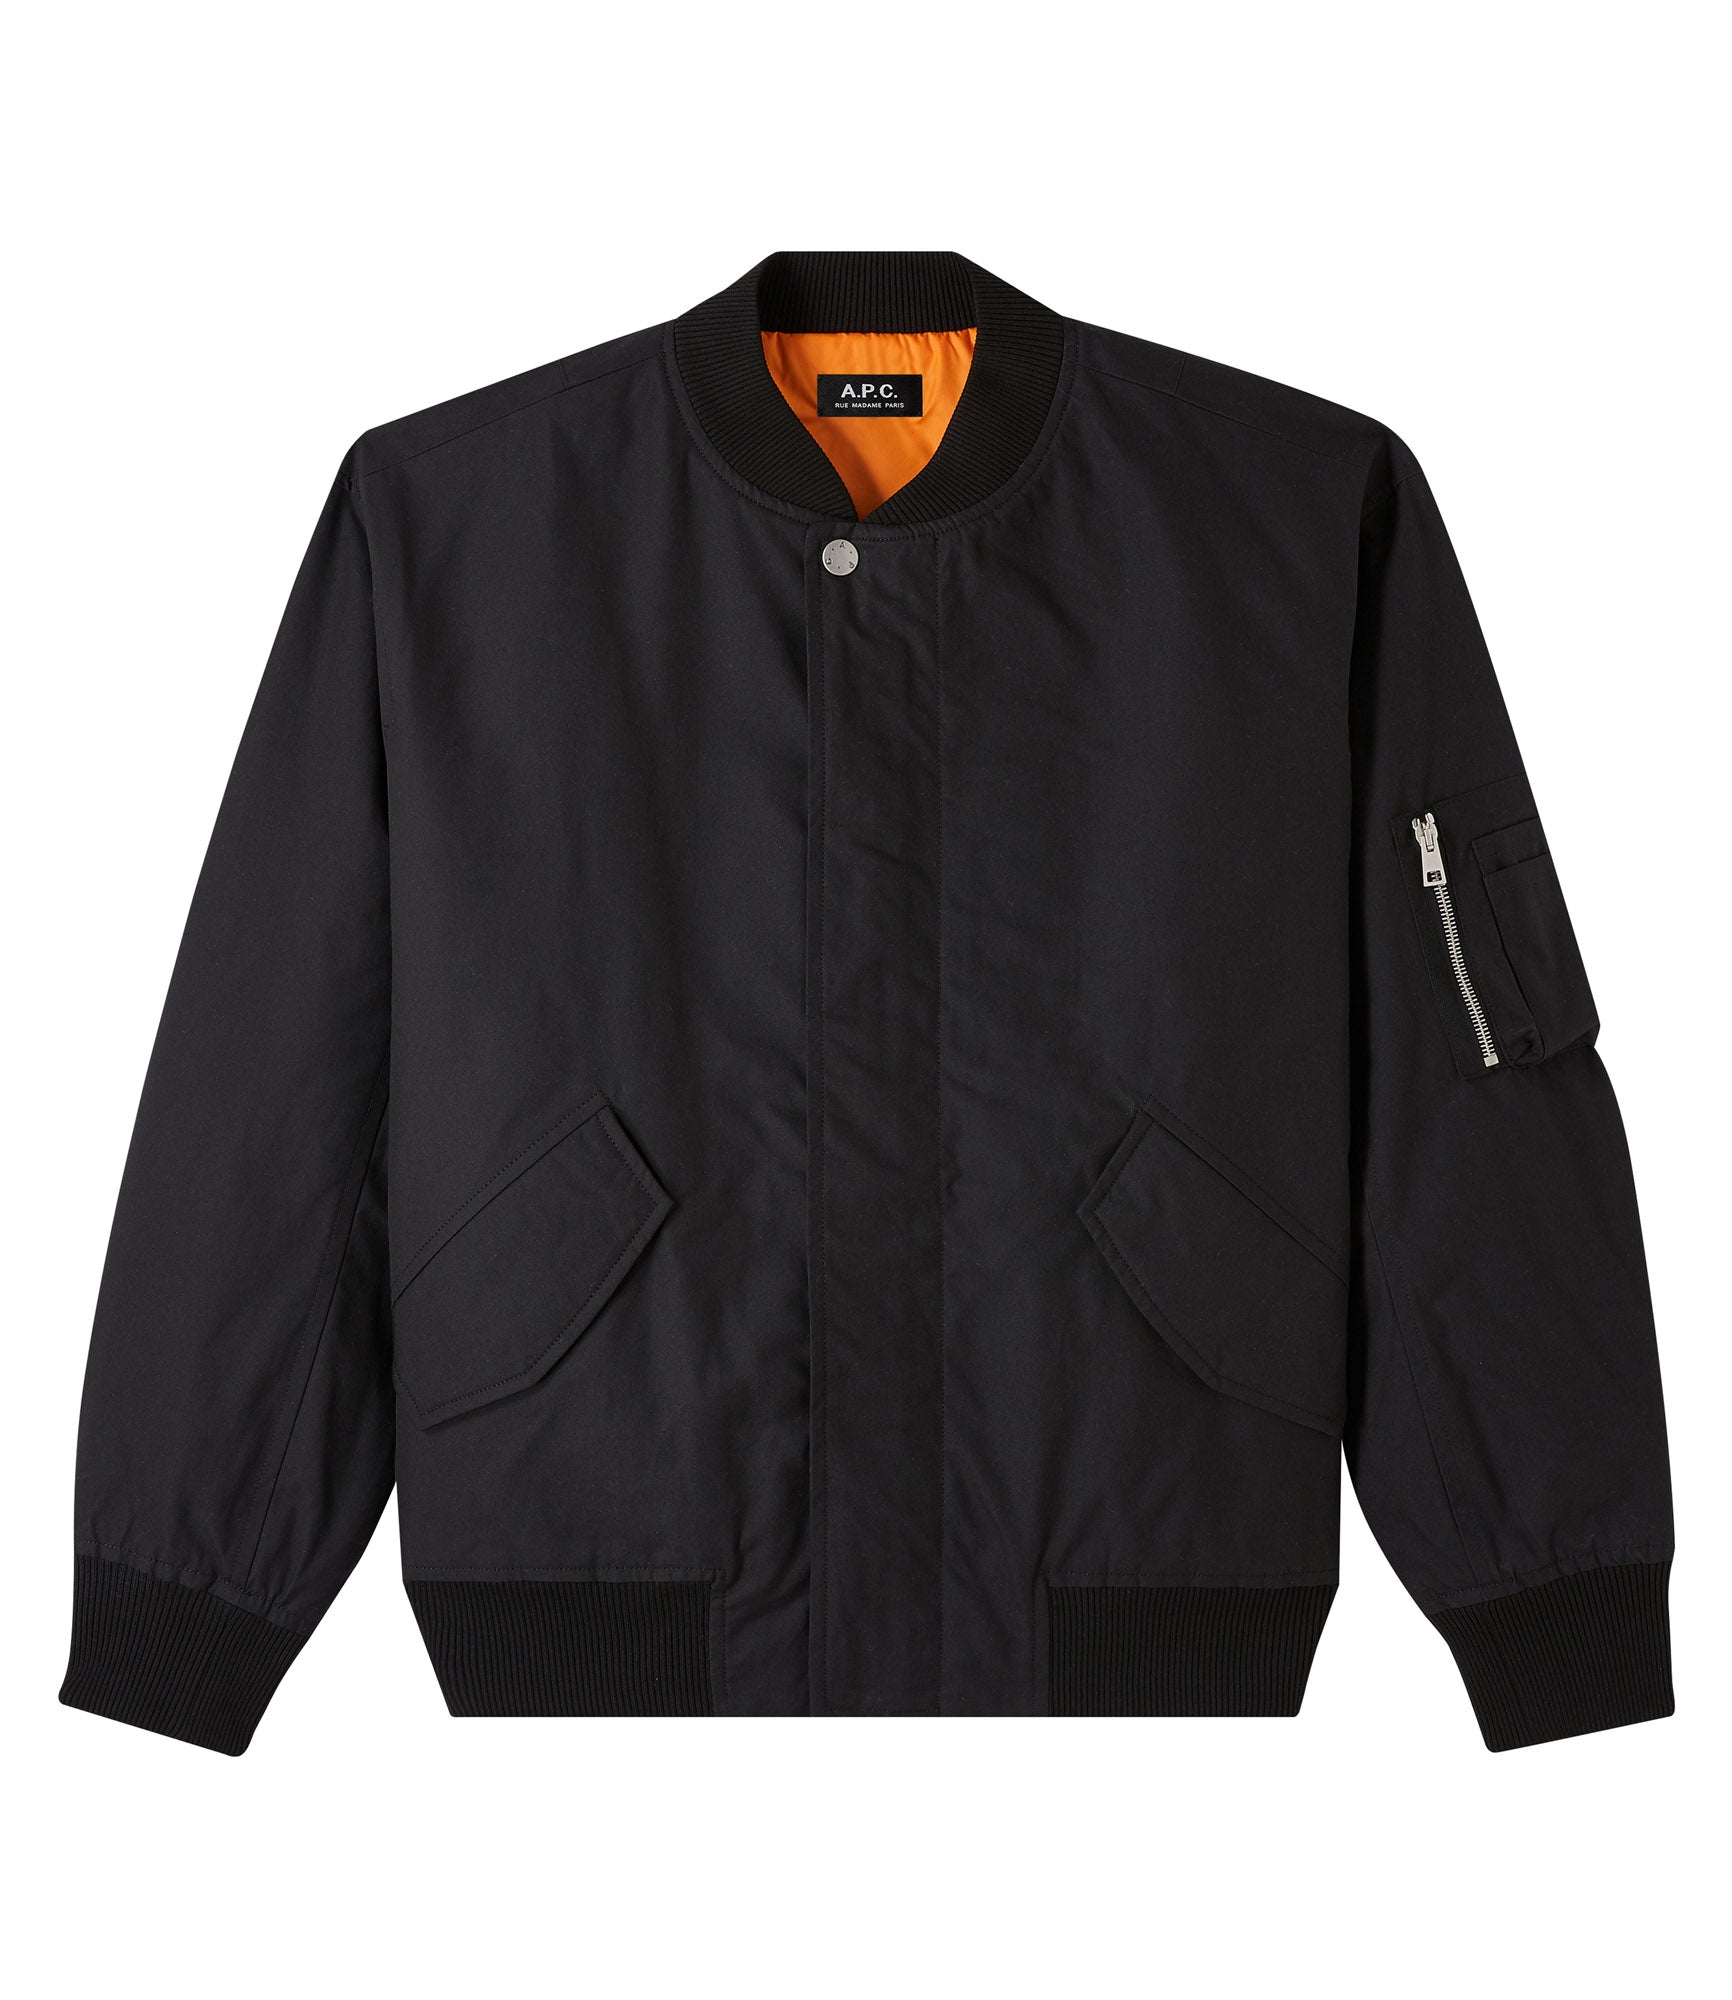 Hamilton jacket | Bomber jacket in water-repellent waxed cotton